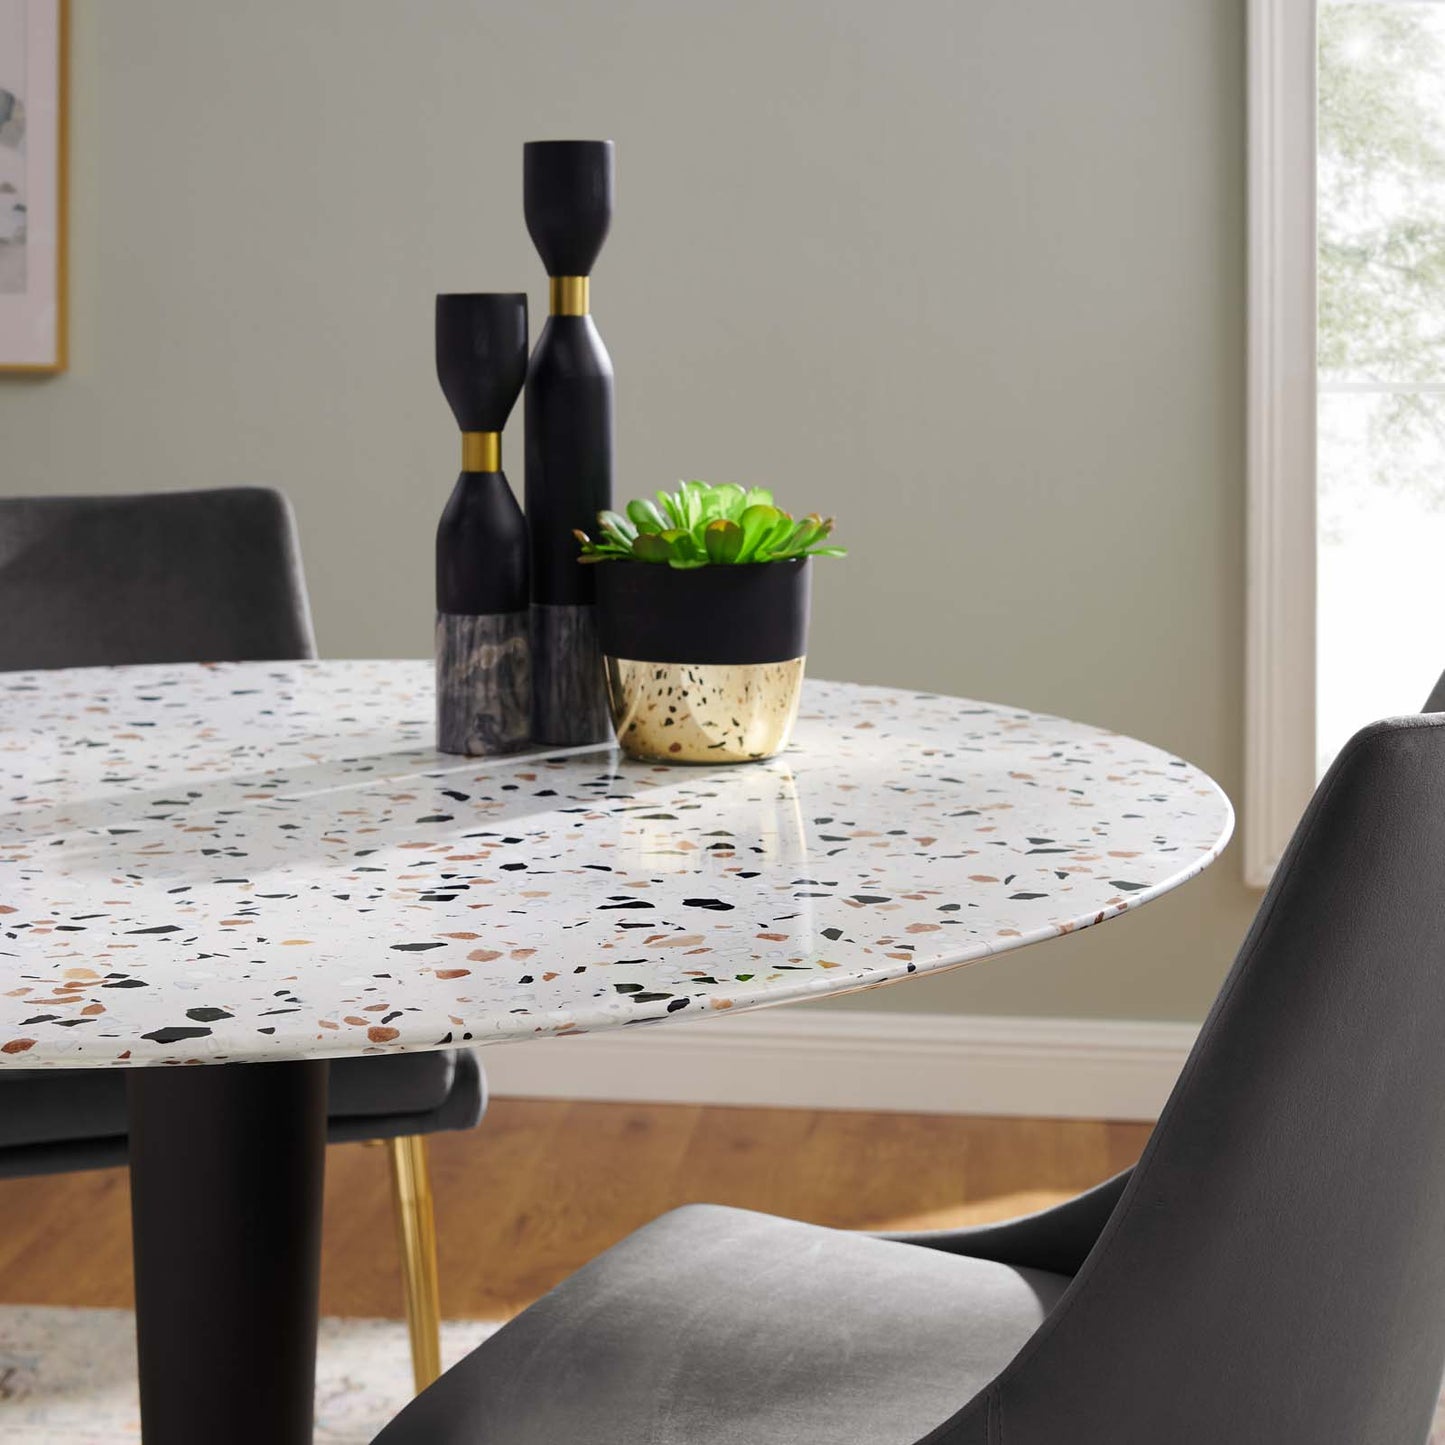 Zinque 47" Round Terrazzo Dining Table Gold White EEI-5732-GLD-WHI